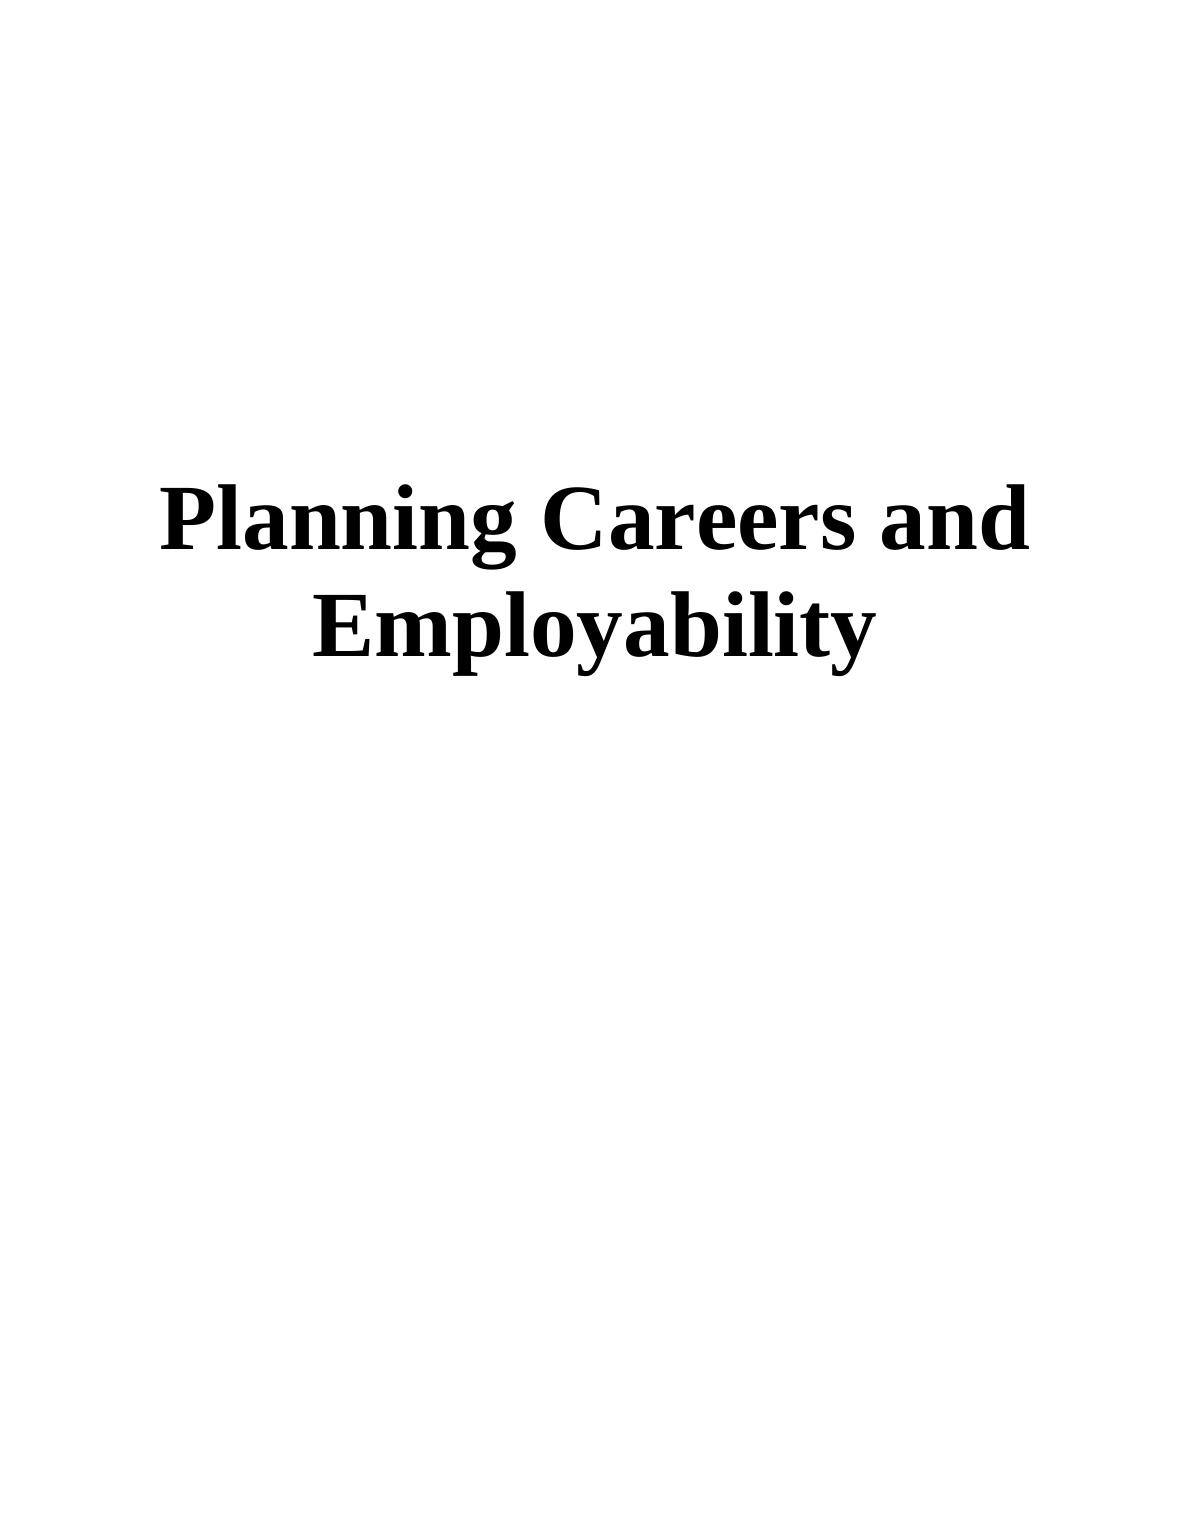 Planning Careers and Employability_1